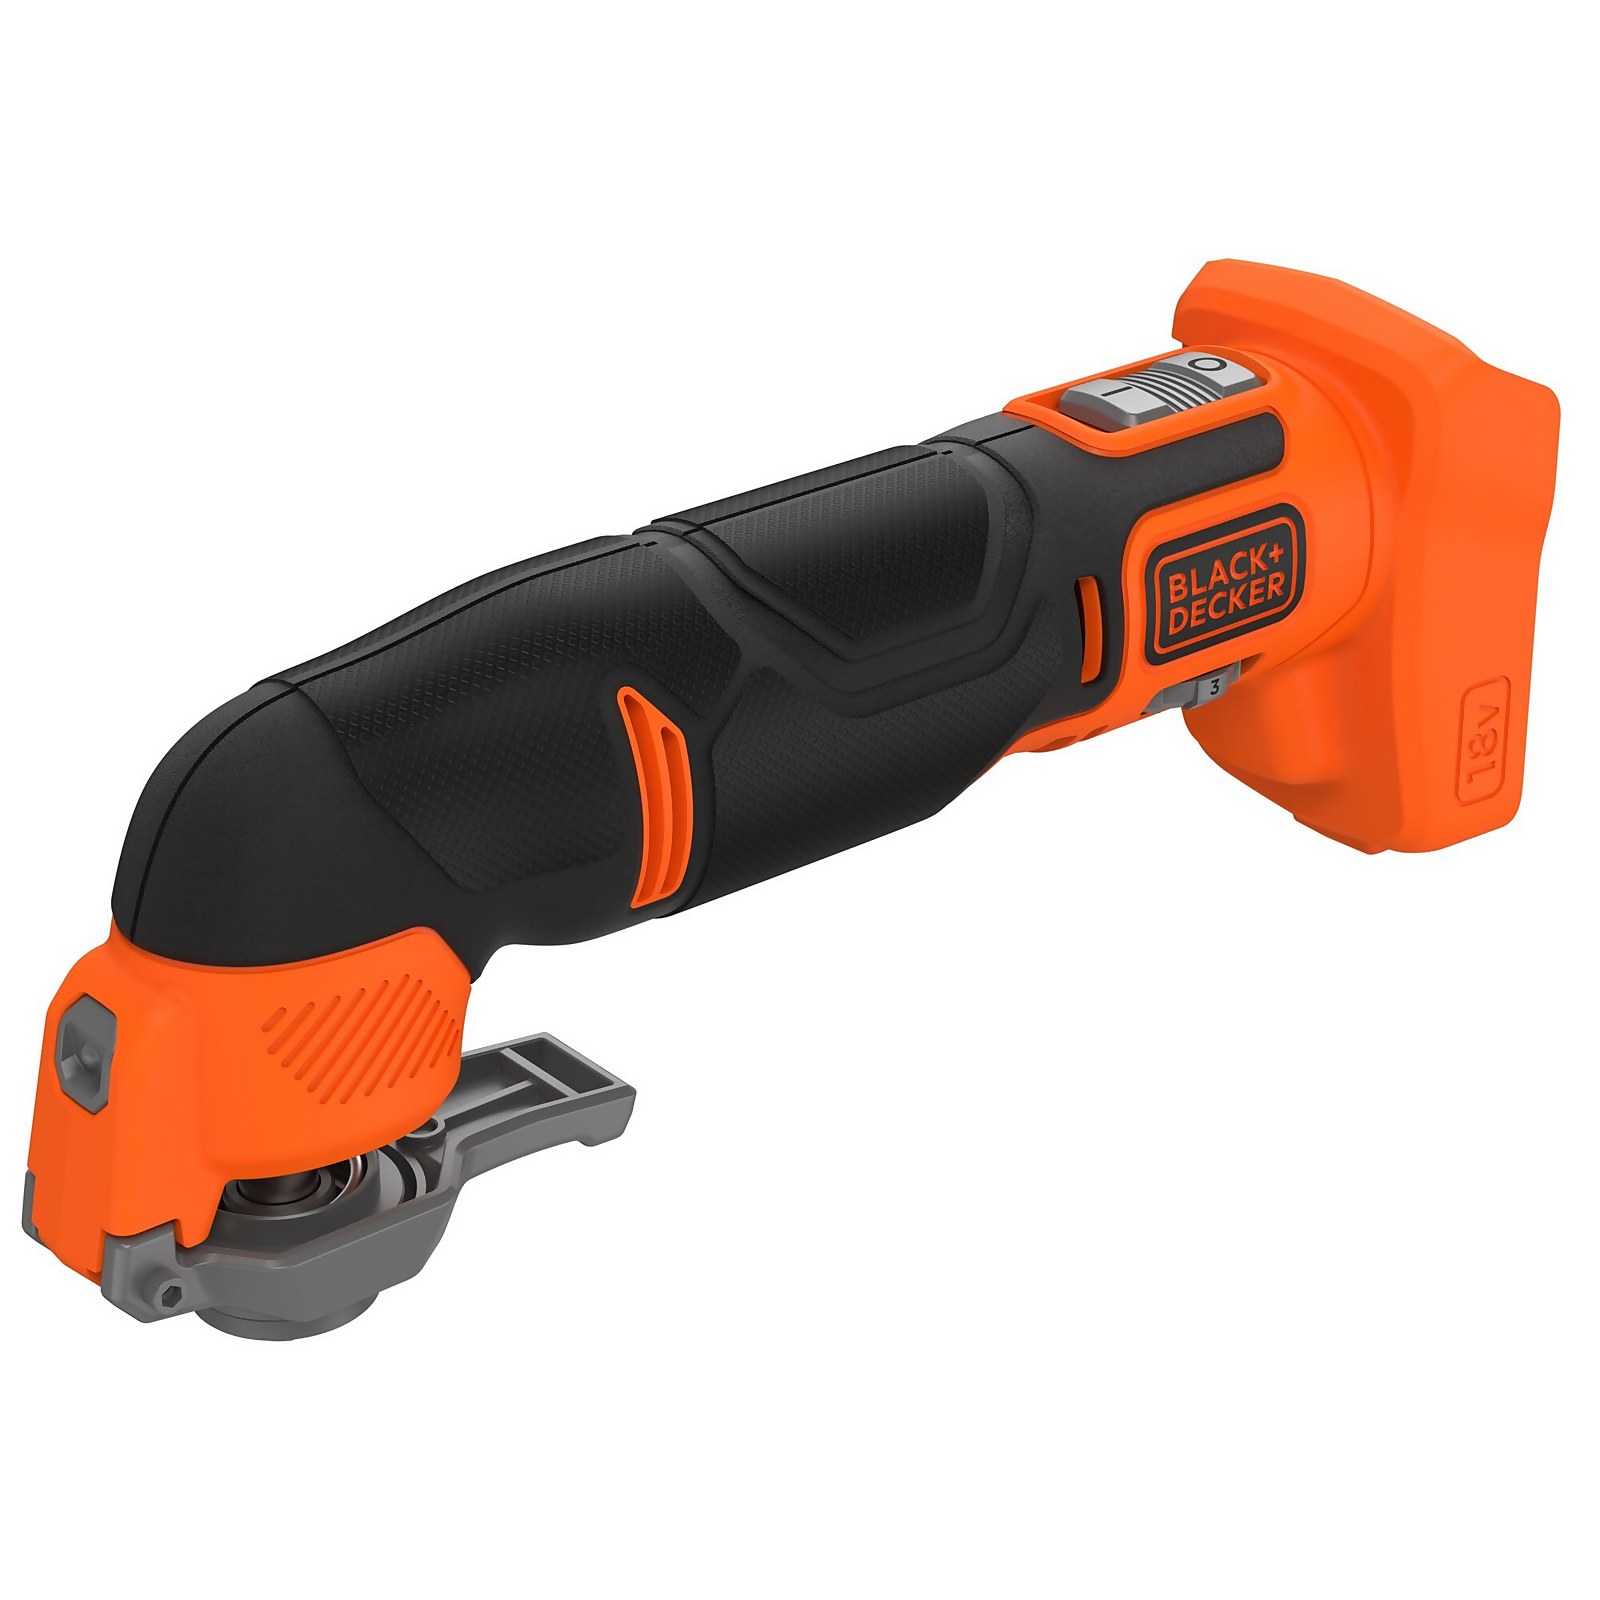 BLACK+DECKER 18V Cordless Oscillating Multi Tool with 18 Accessories (no battery included) (BDCOS18N-XJ)